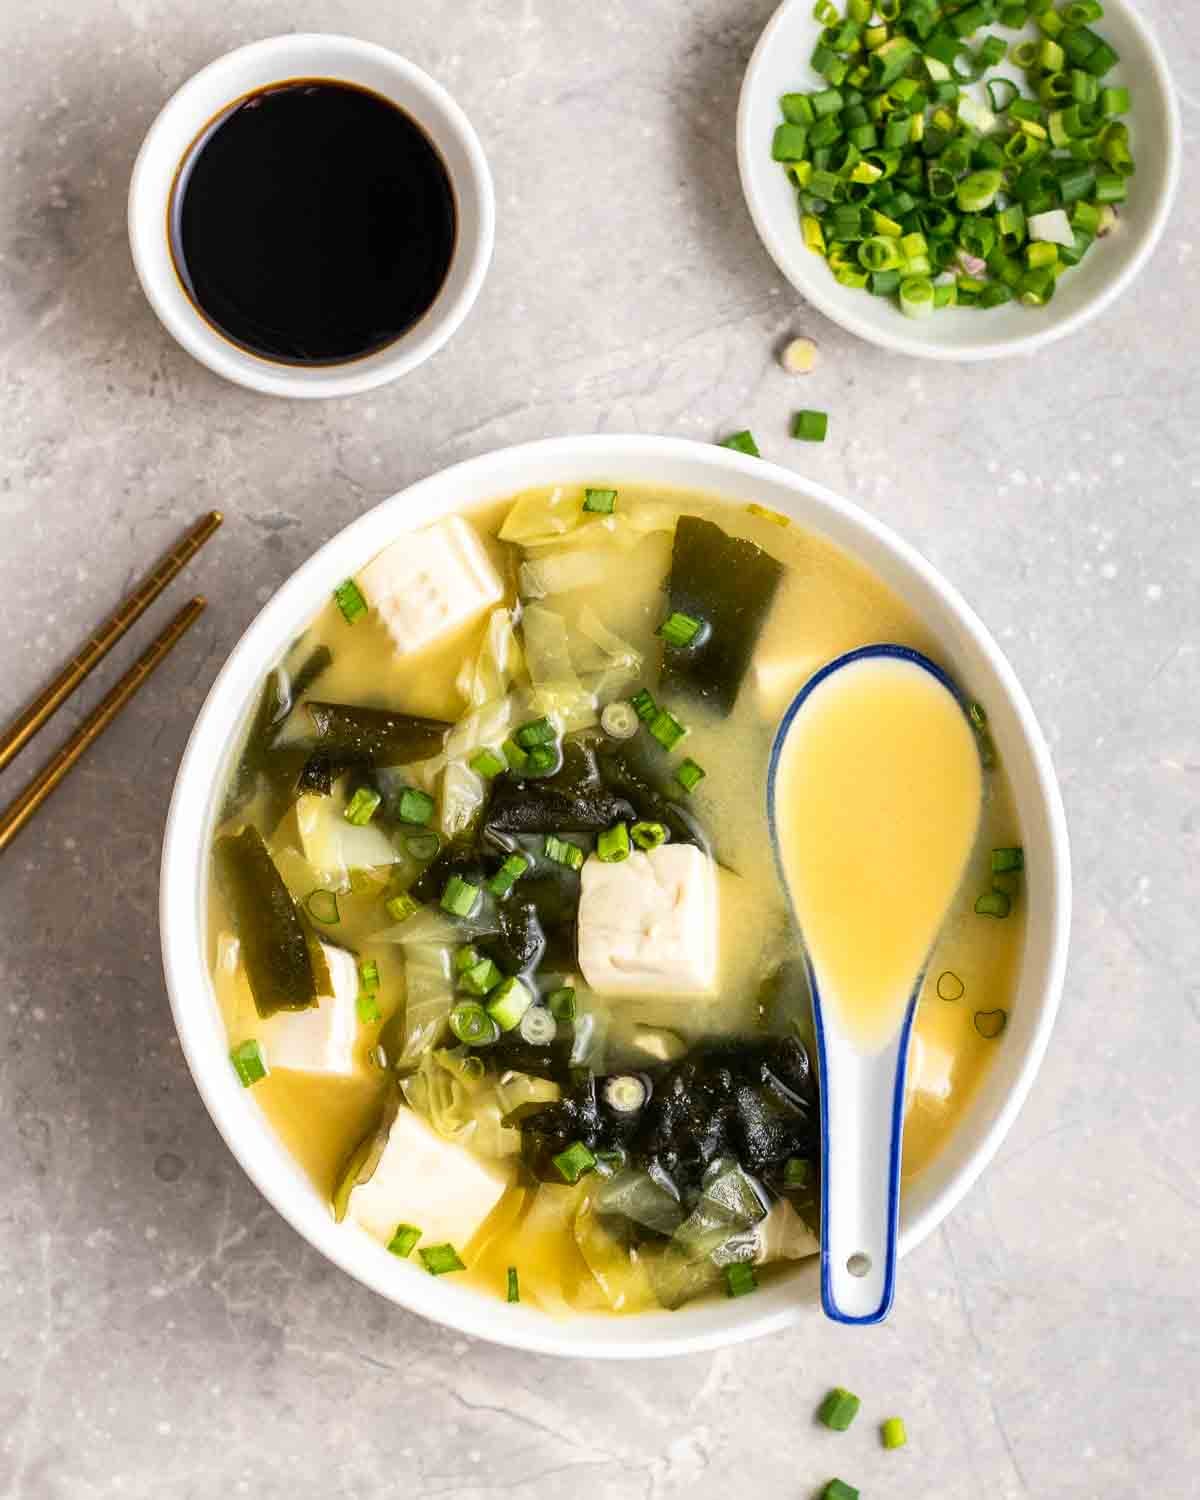 Japanese Wakame Miso Soup with Cabbage